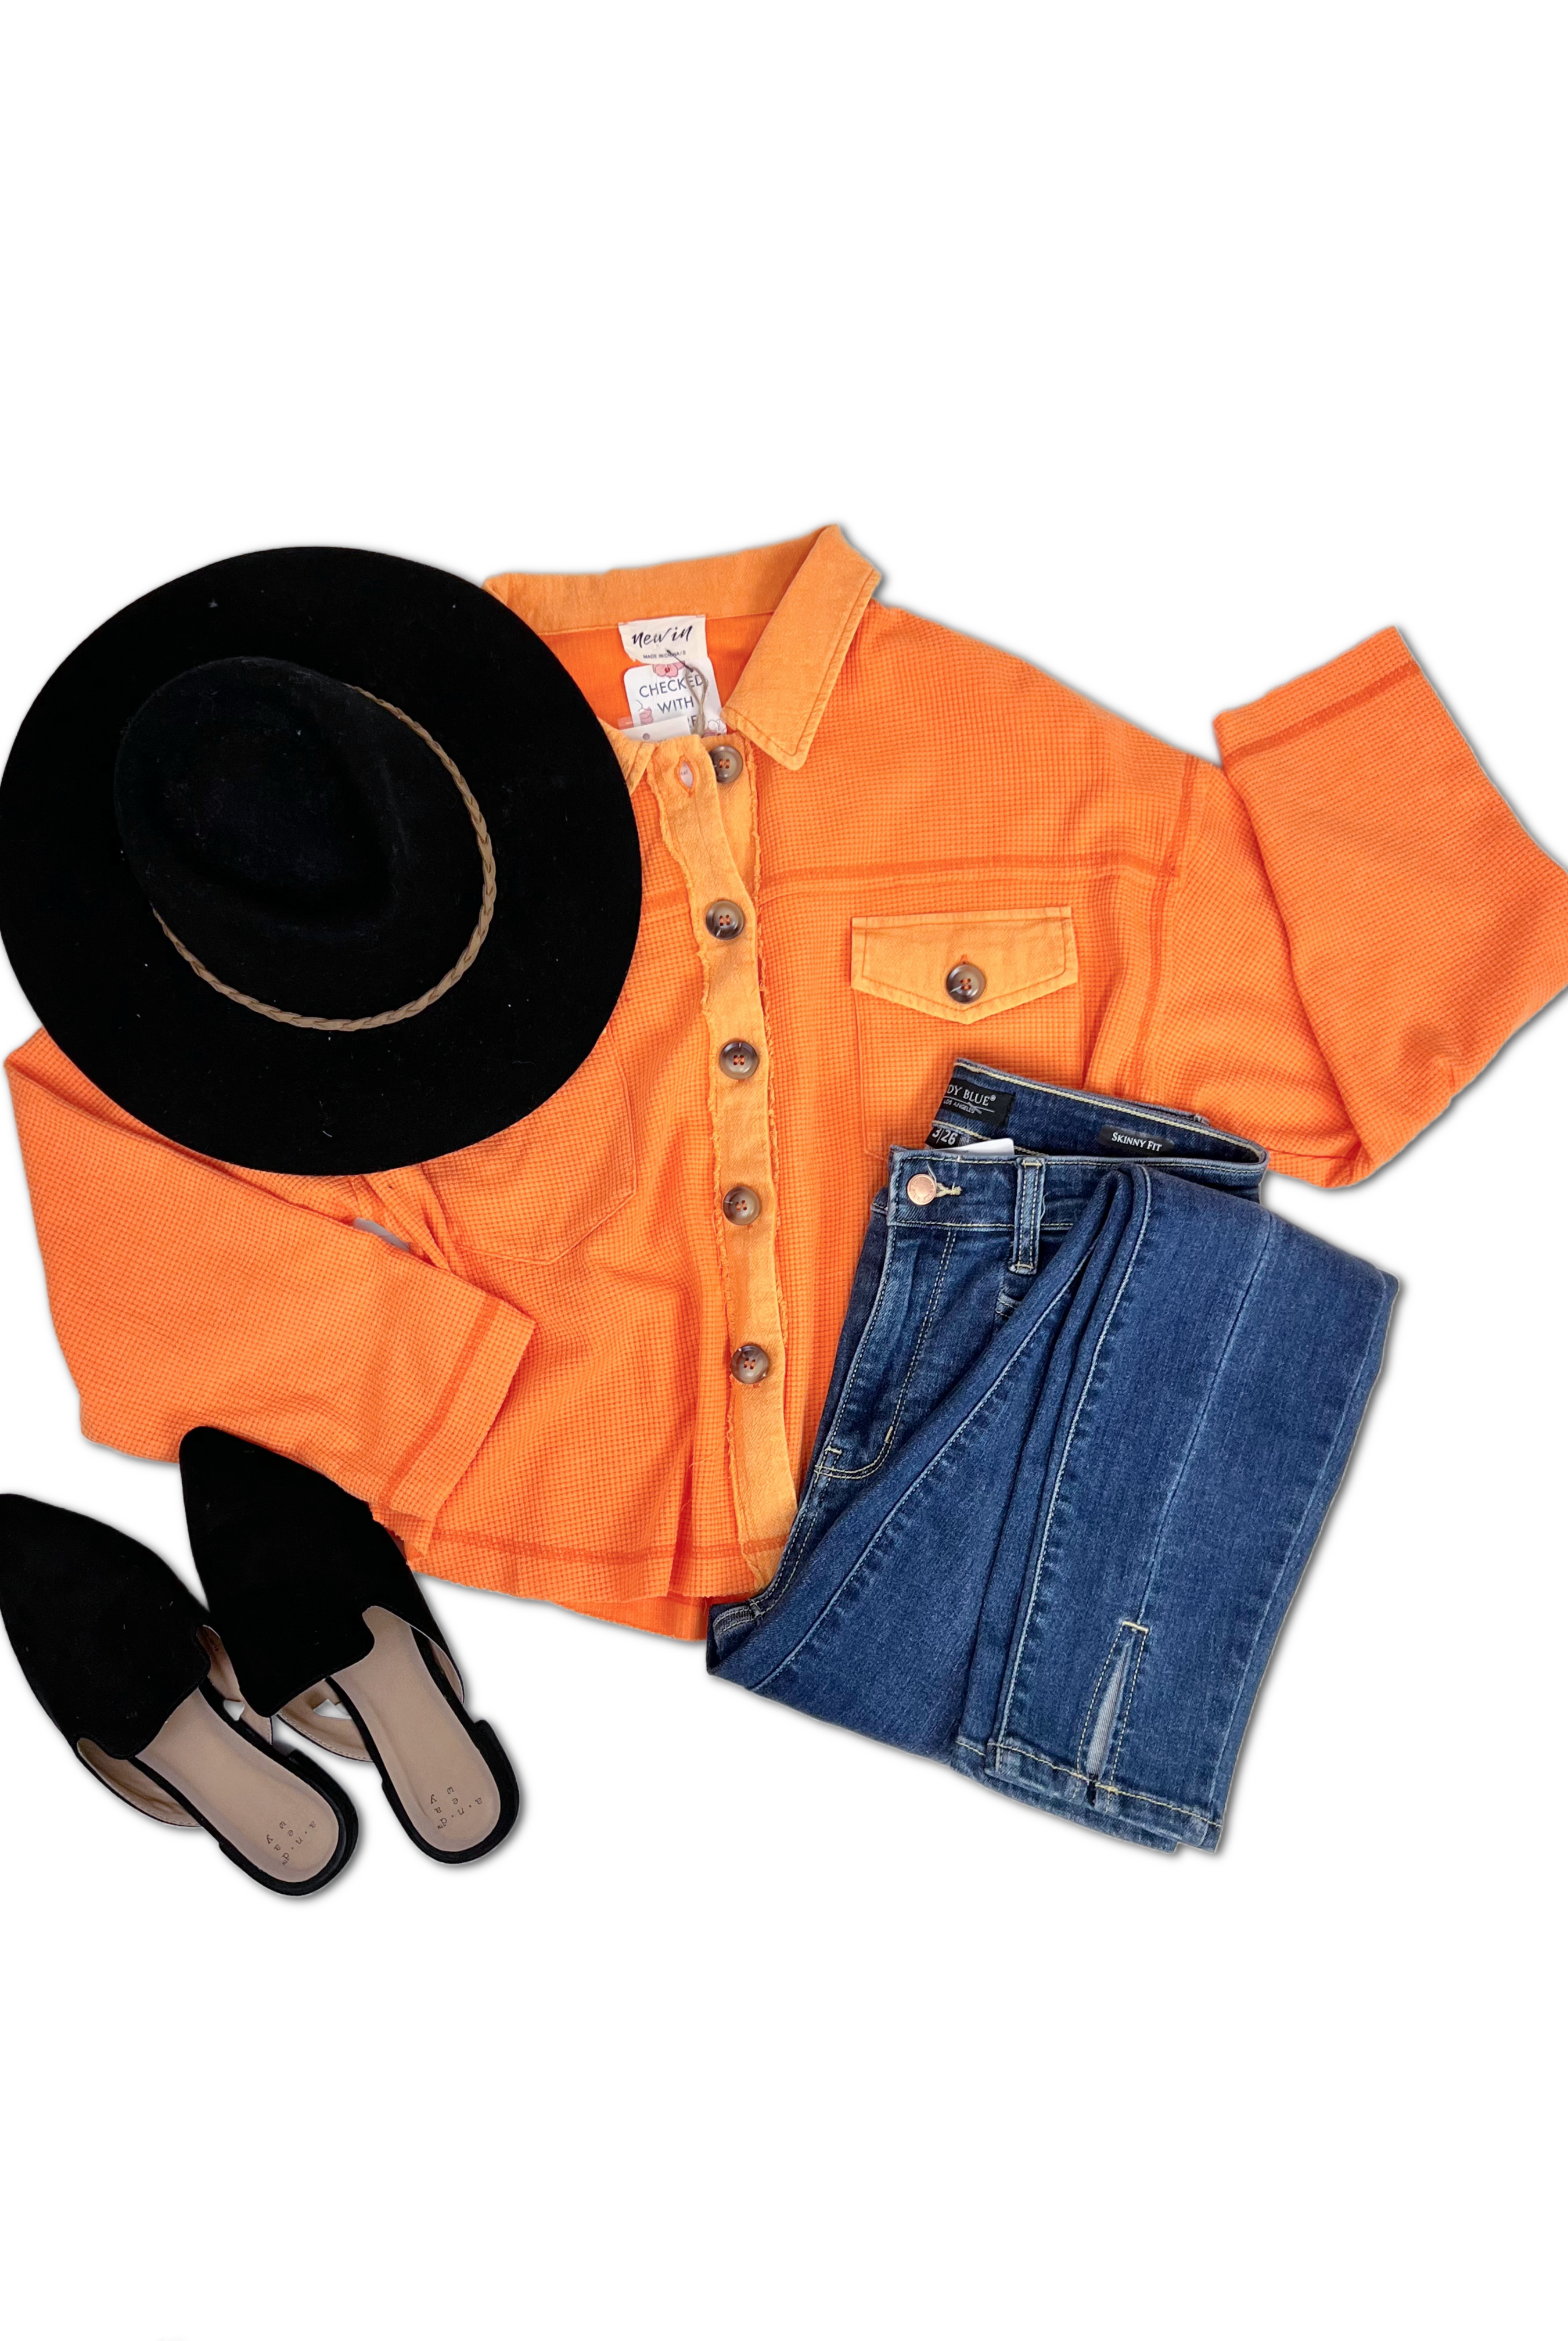 Contrast Waffle Knit - Tangerine-Long Sleeves-OOTD Boutique Simplified-Urban Threadz Boutique, Women's Fashion Boutique in Saugatuck, MI